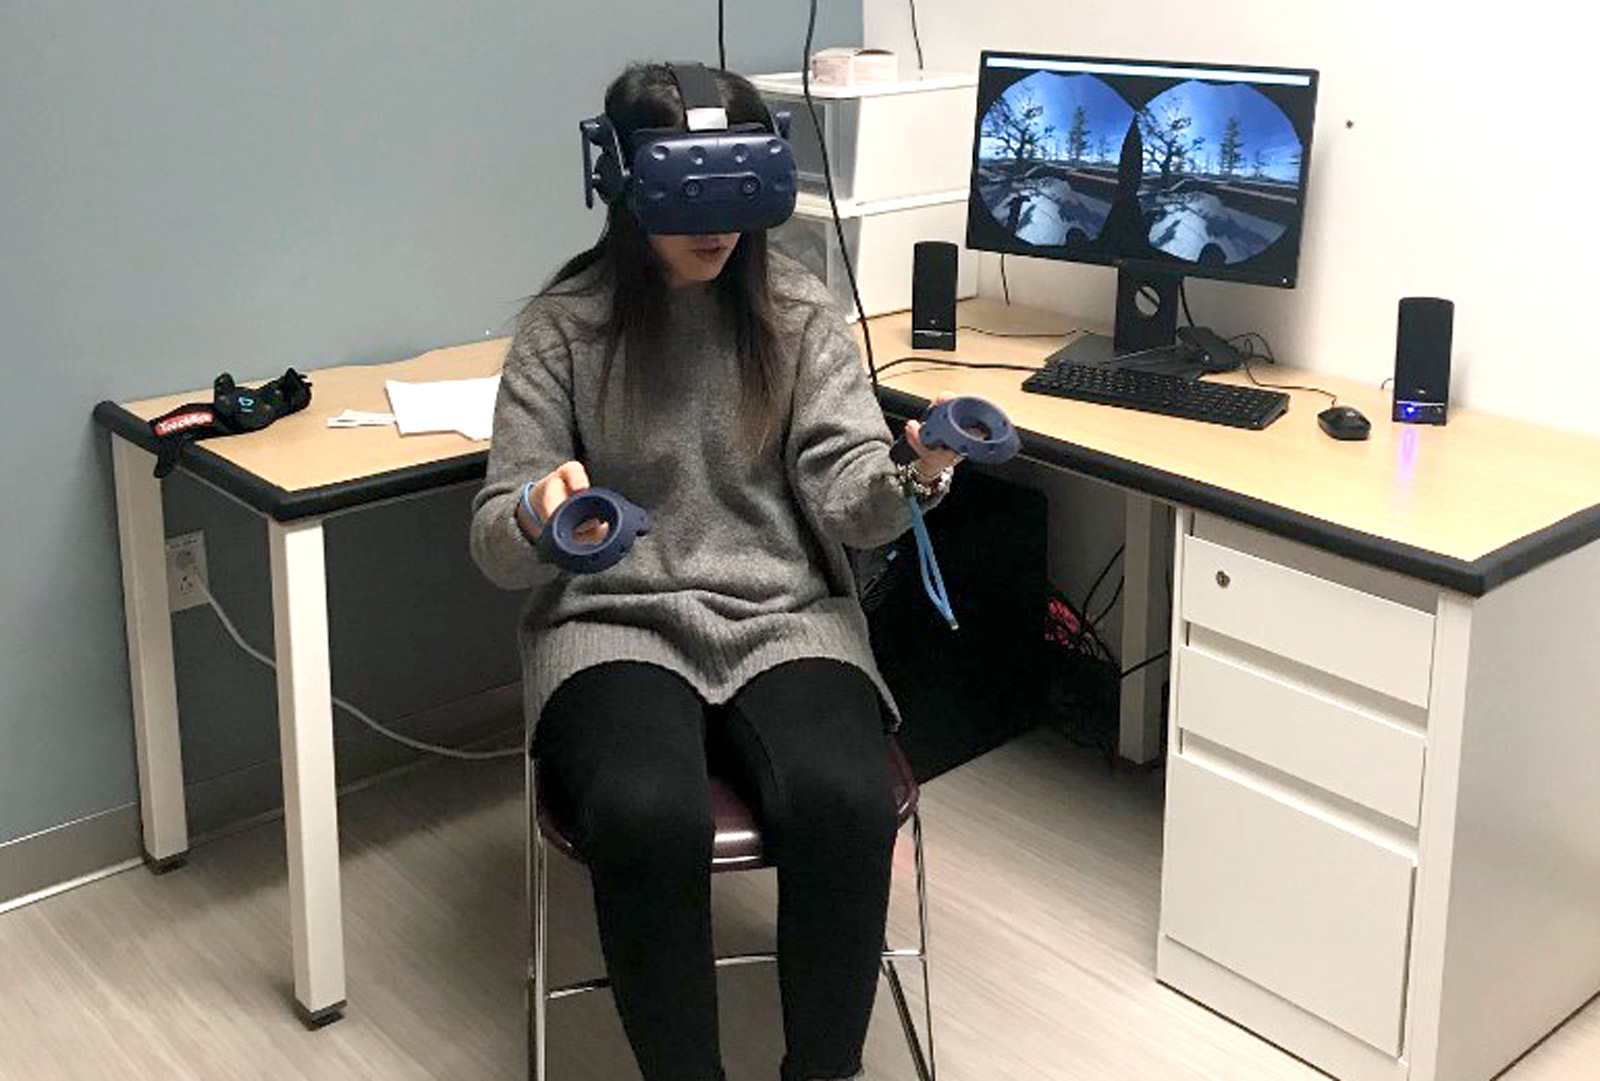 Woman wearing virtual reality headset uses handheld controllers